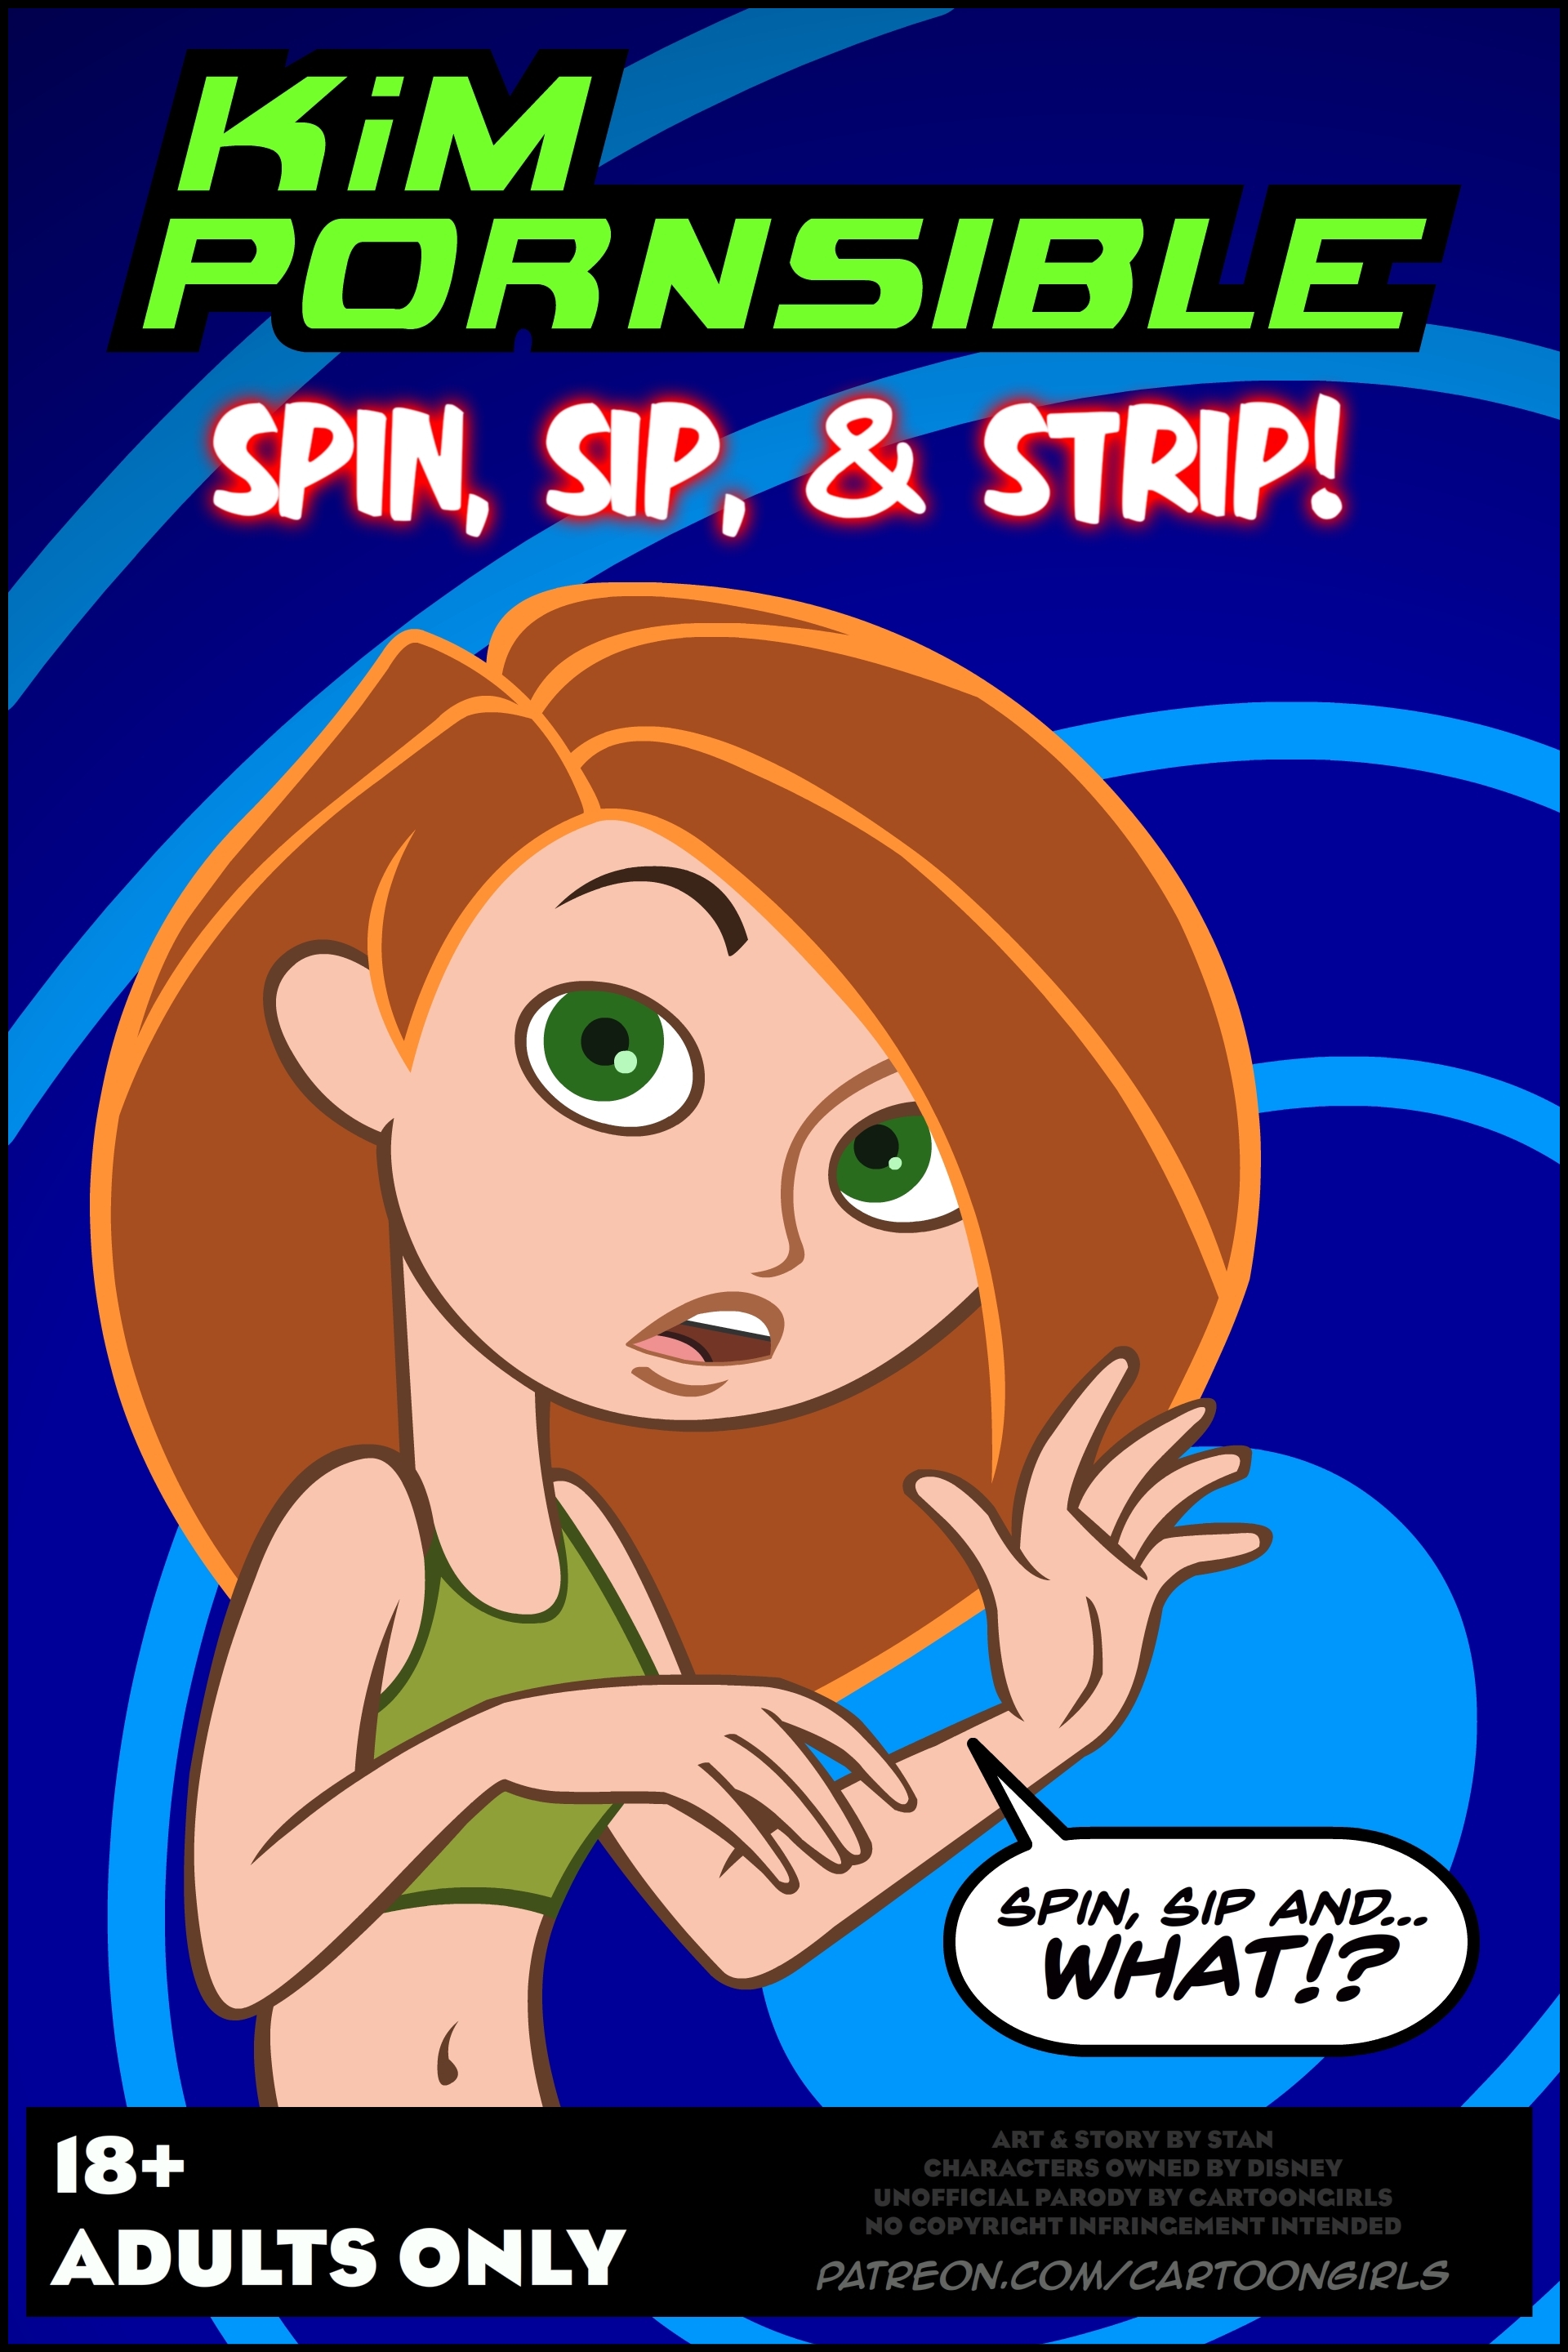 Kim Possible - Spin, Sip & Strip from Cartoongirls